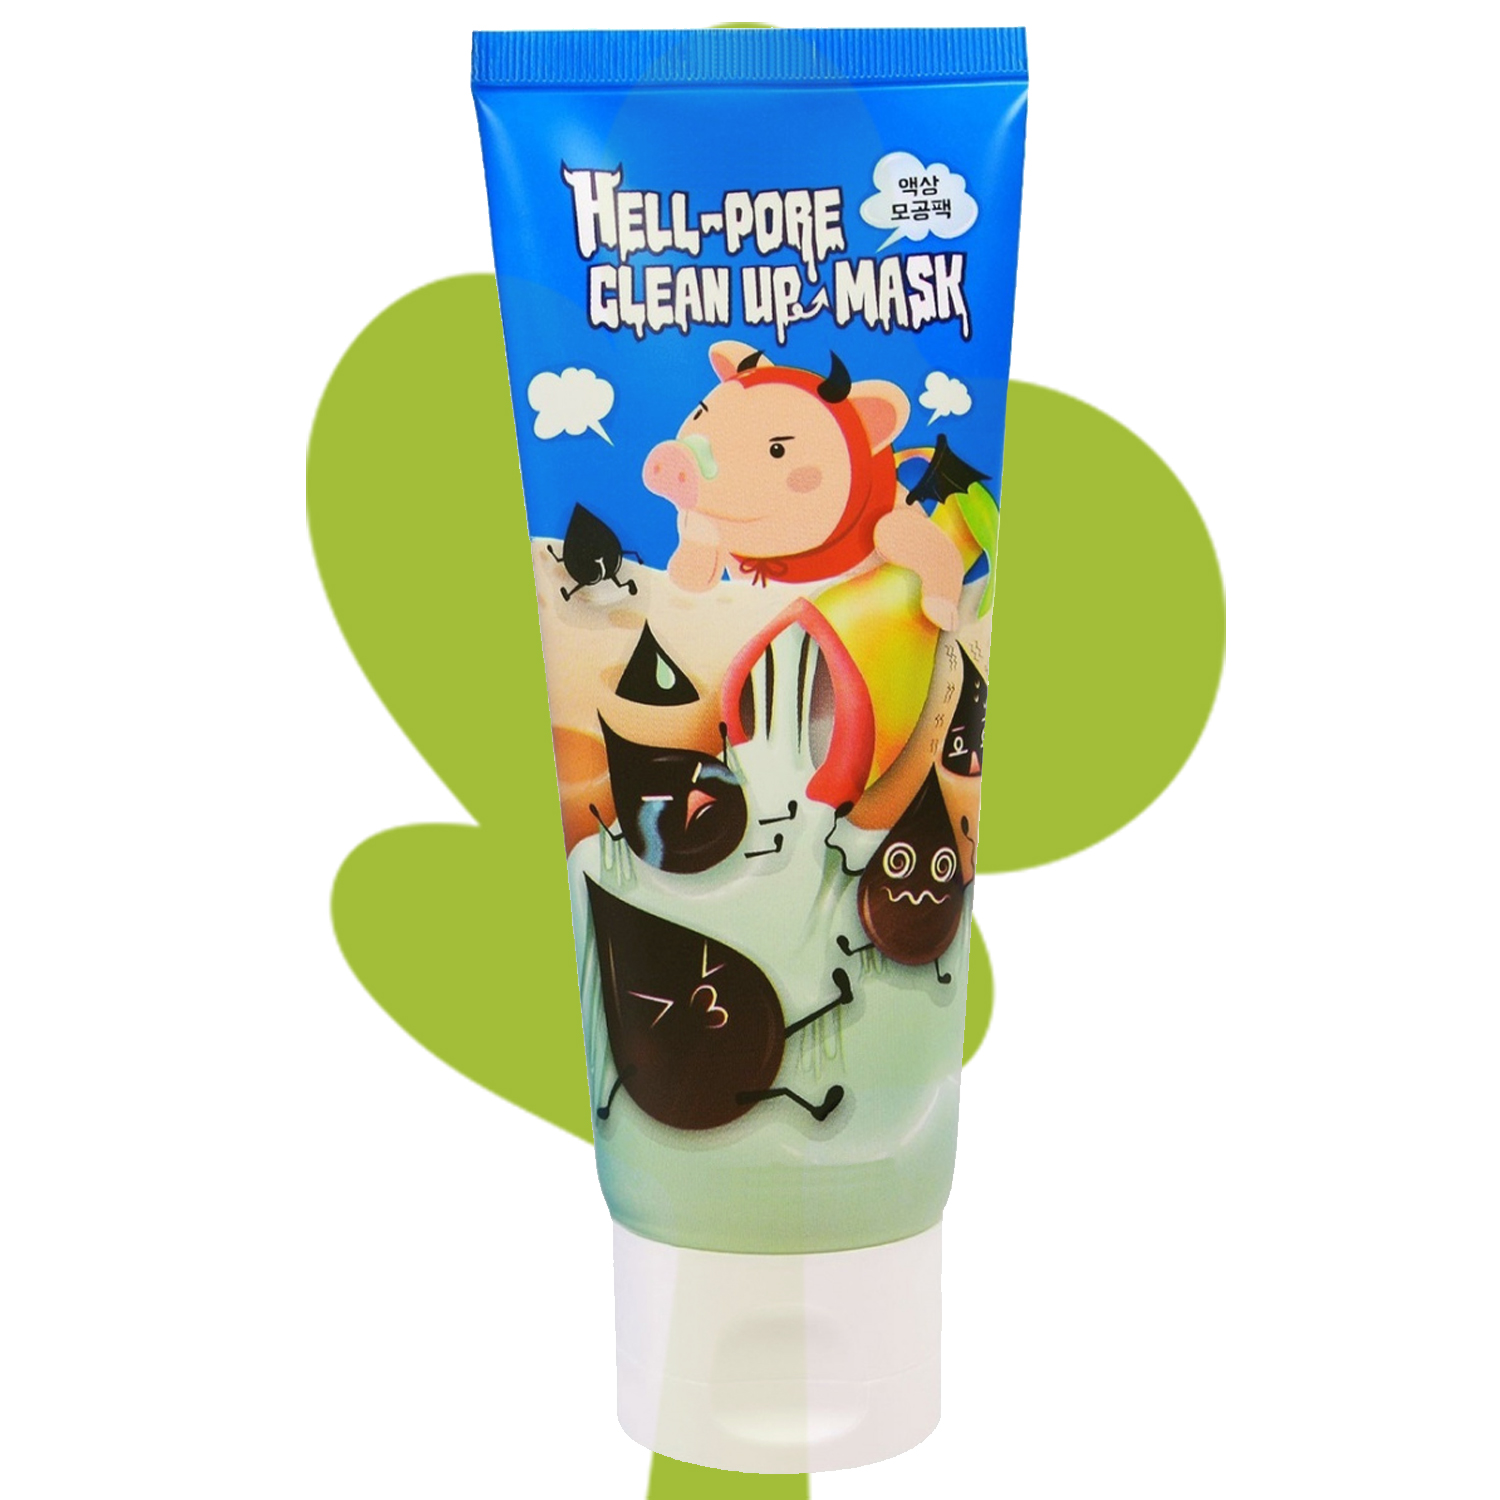 Milky Piggy Hell-Pore clean up Mask. Hell Pore clean up Mask. Milky piggy hell pore clean up